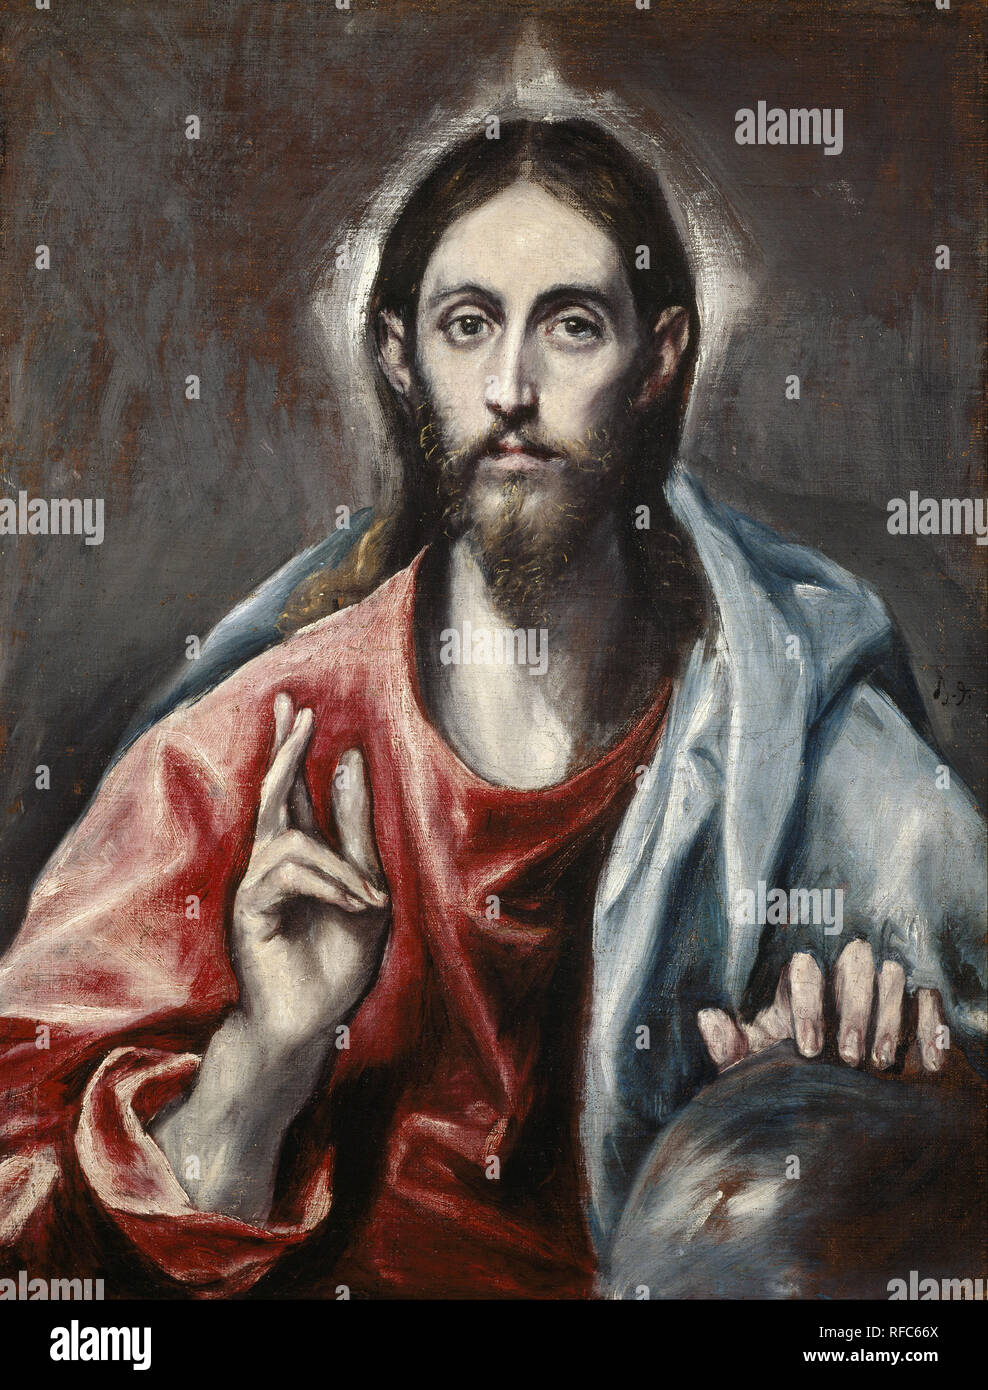 Christ Blessing ('The Saviour of the World'). Date/Period: 1600. Painting. Oil on canvas. Height: 730 mm (28.74 in); Width: 565 mm (22.24 in). Author: GRECO, EL. Stock Photo